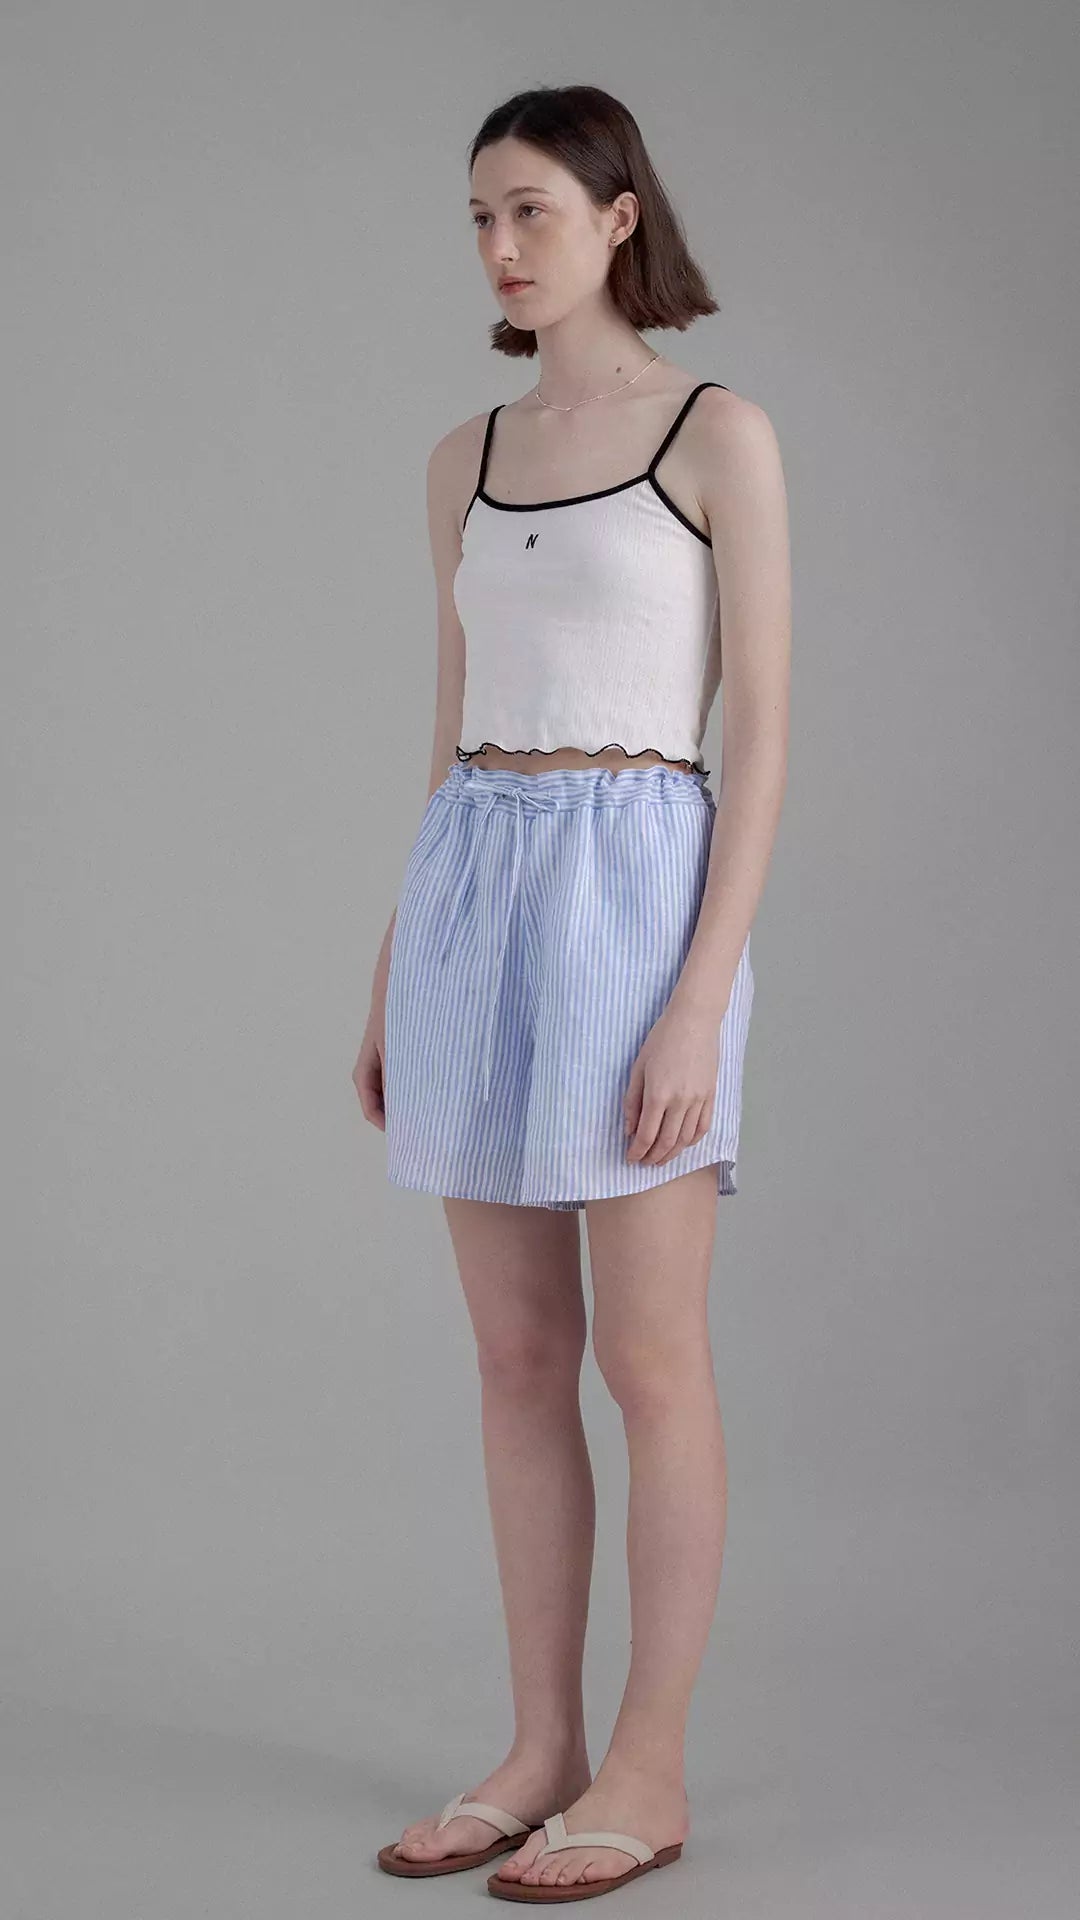 Spaghetti Strap Tank Top with Contrast Ruffle Trim and Small 'n' Embroidery